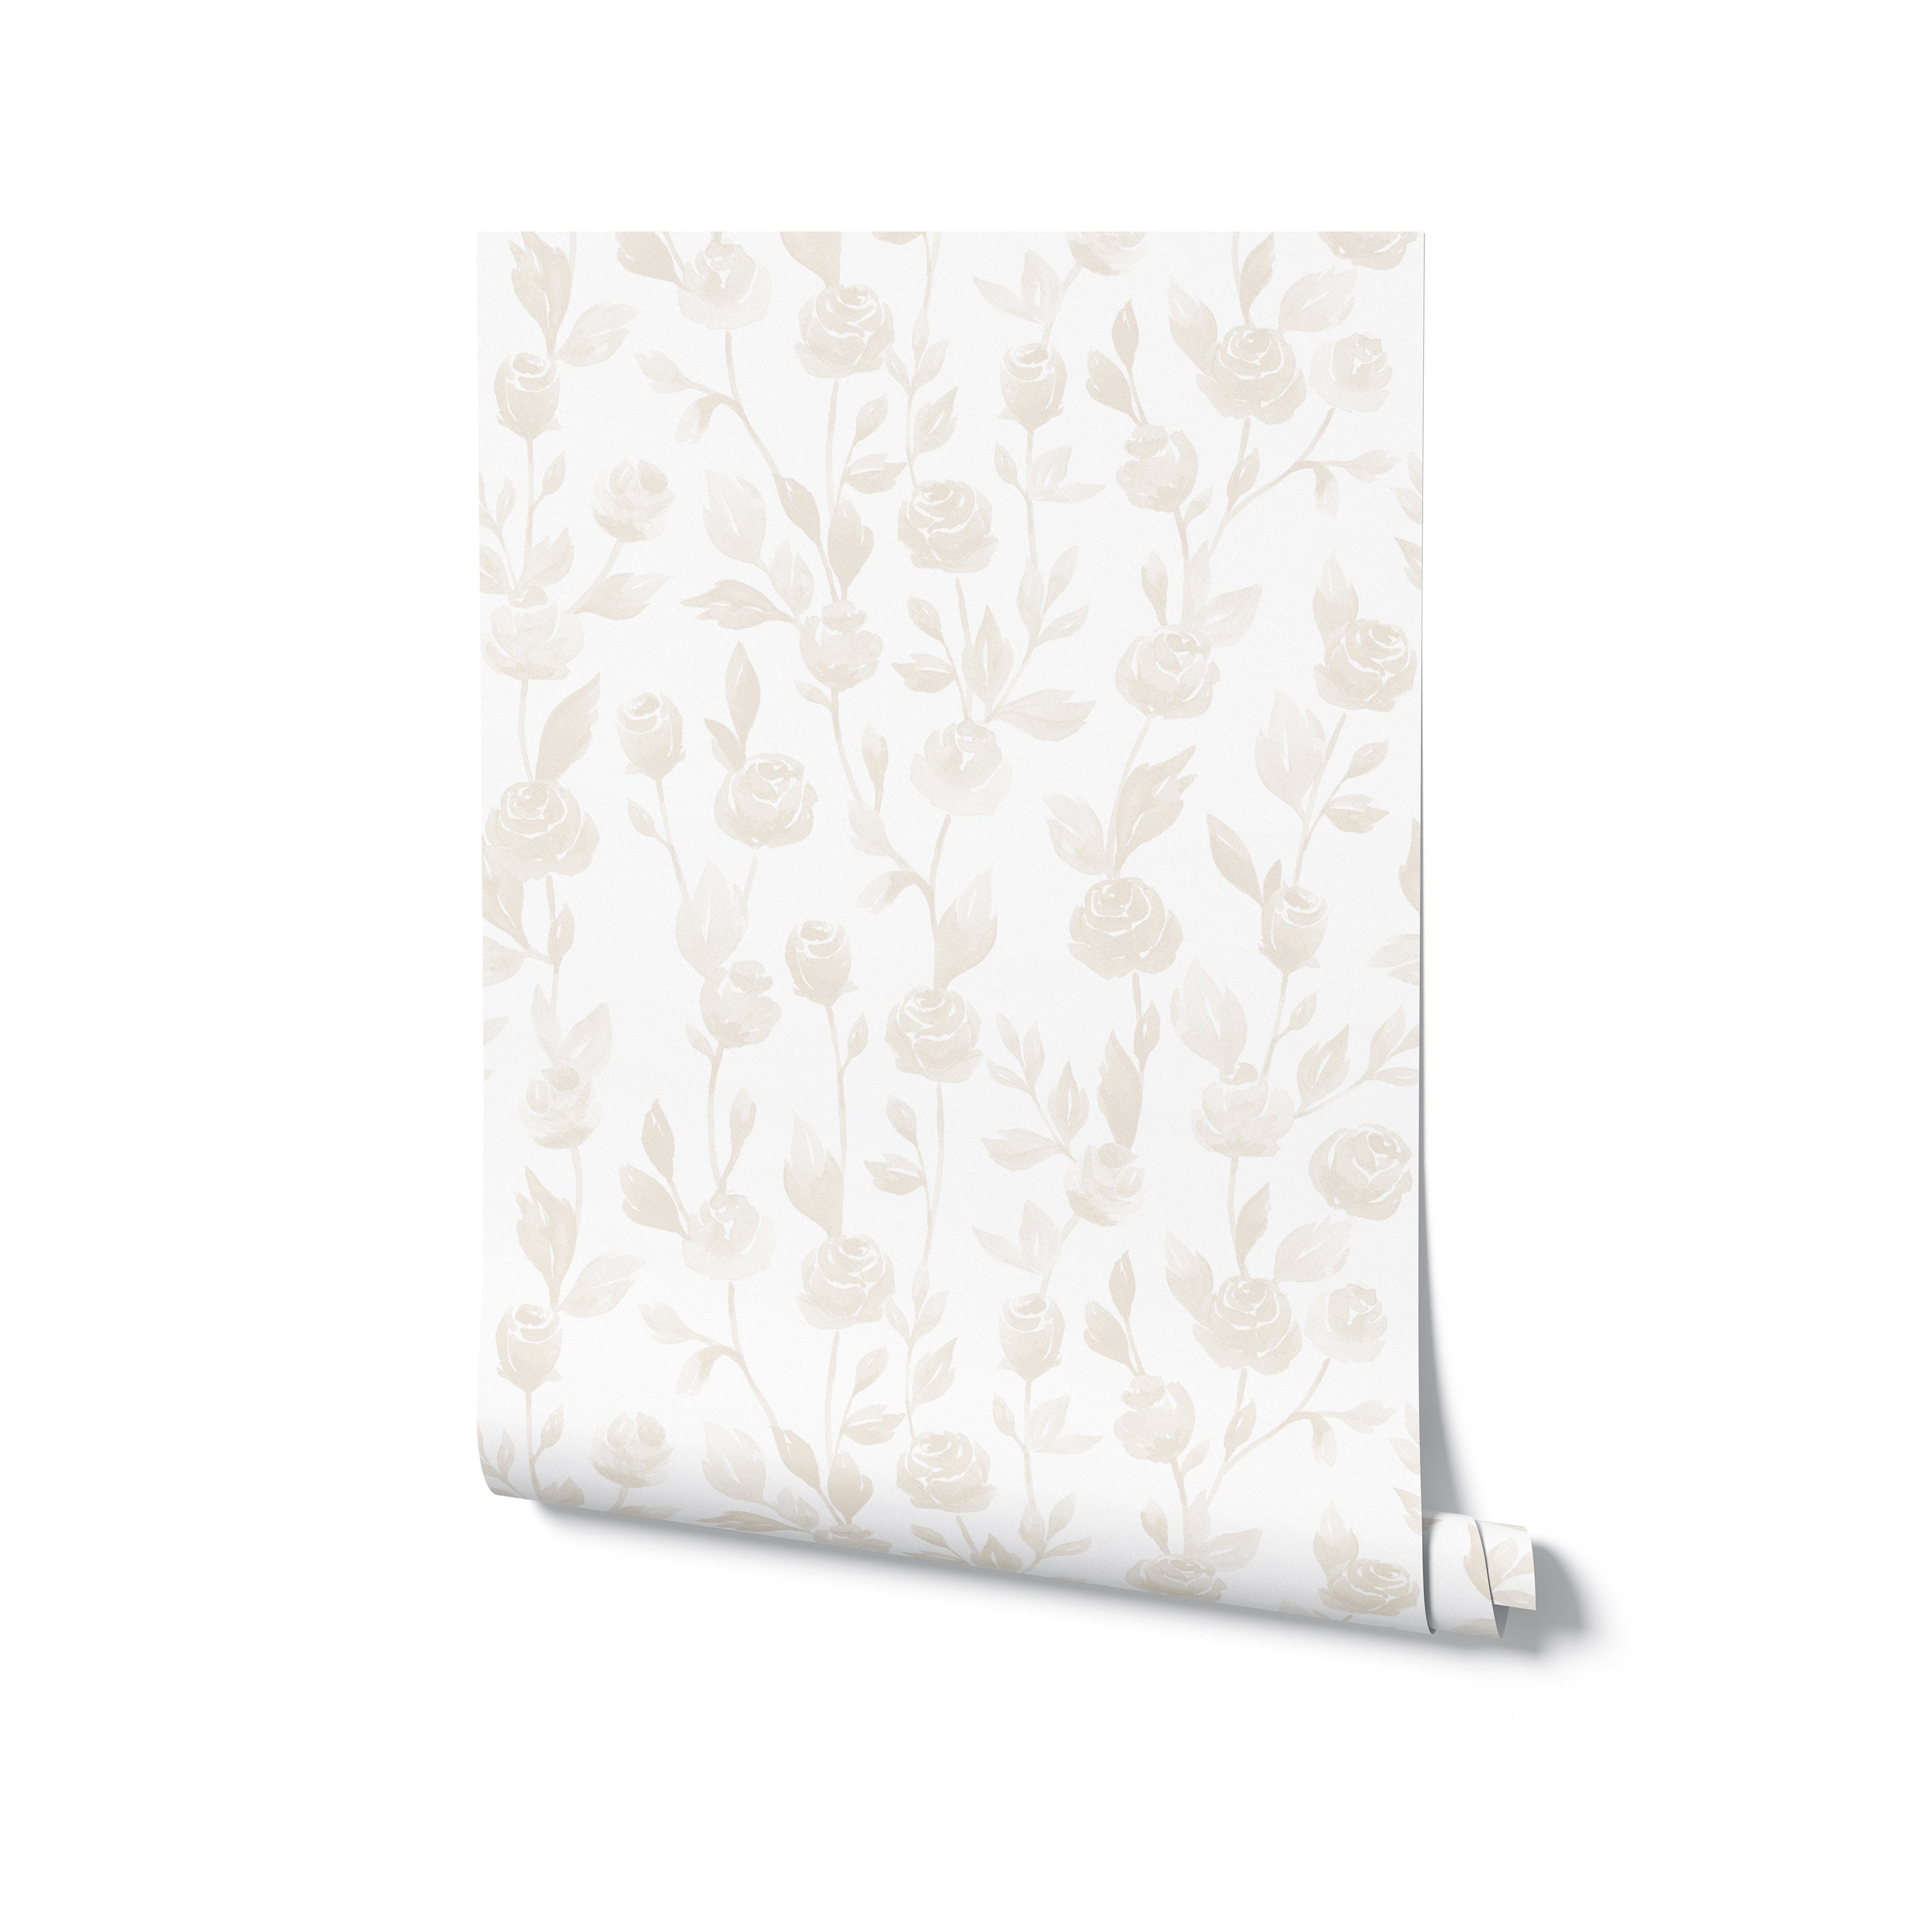 A roll of Cream Watercolour Rose Wallpaper, illustrating the design's versatility and the gentle watercolor effect of the roses and leaves, perfect for enhancing various spaces with its understated elegance.